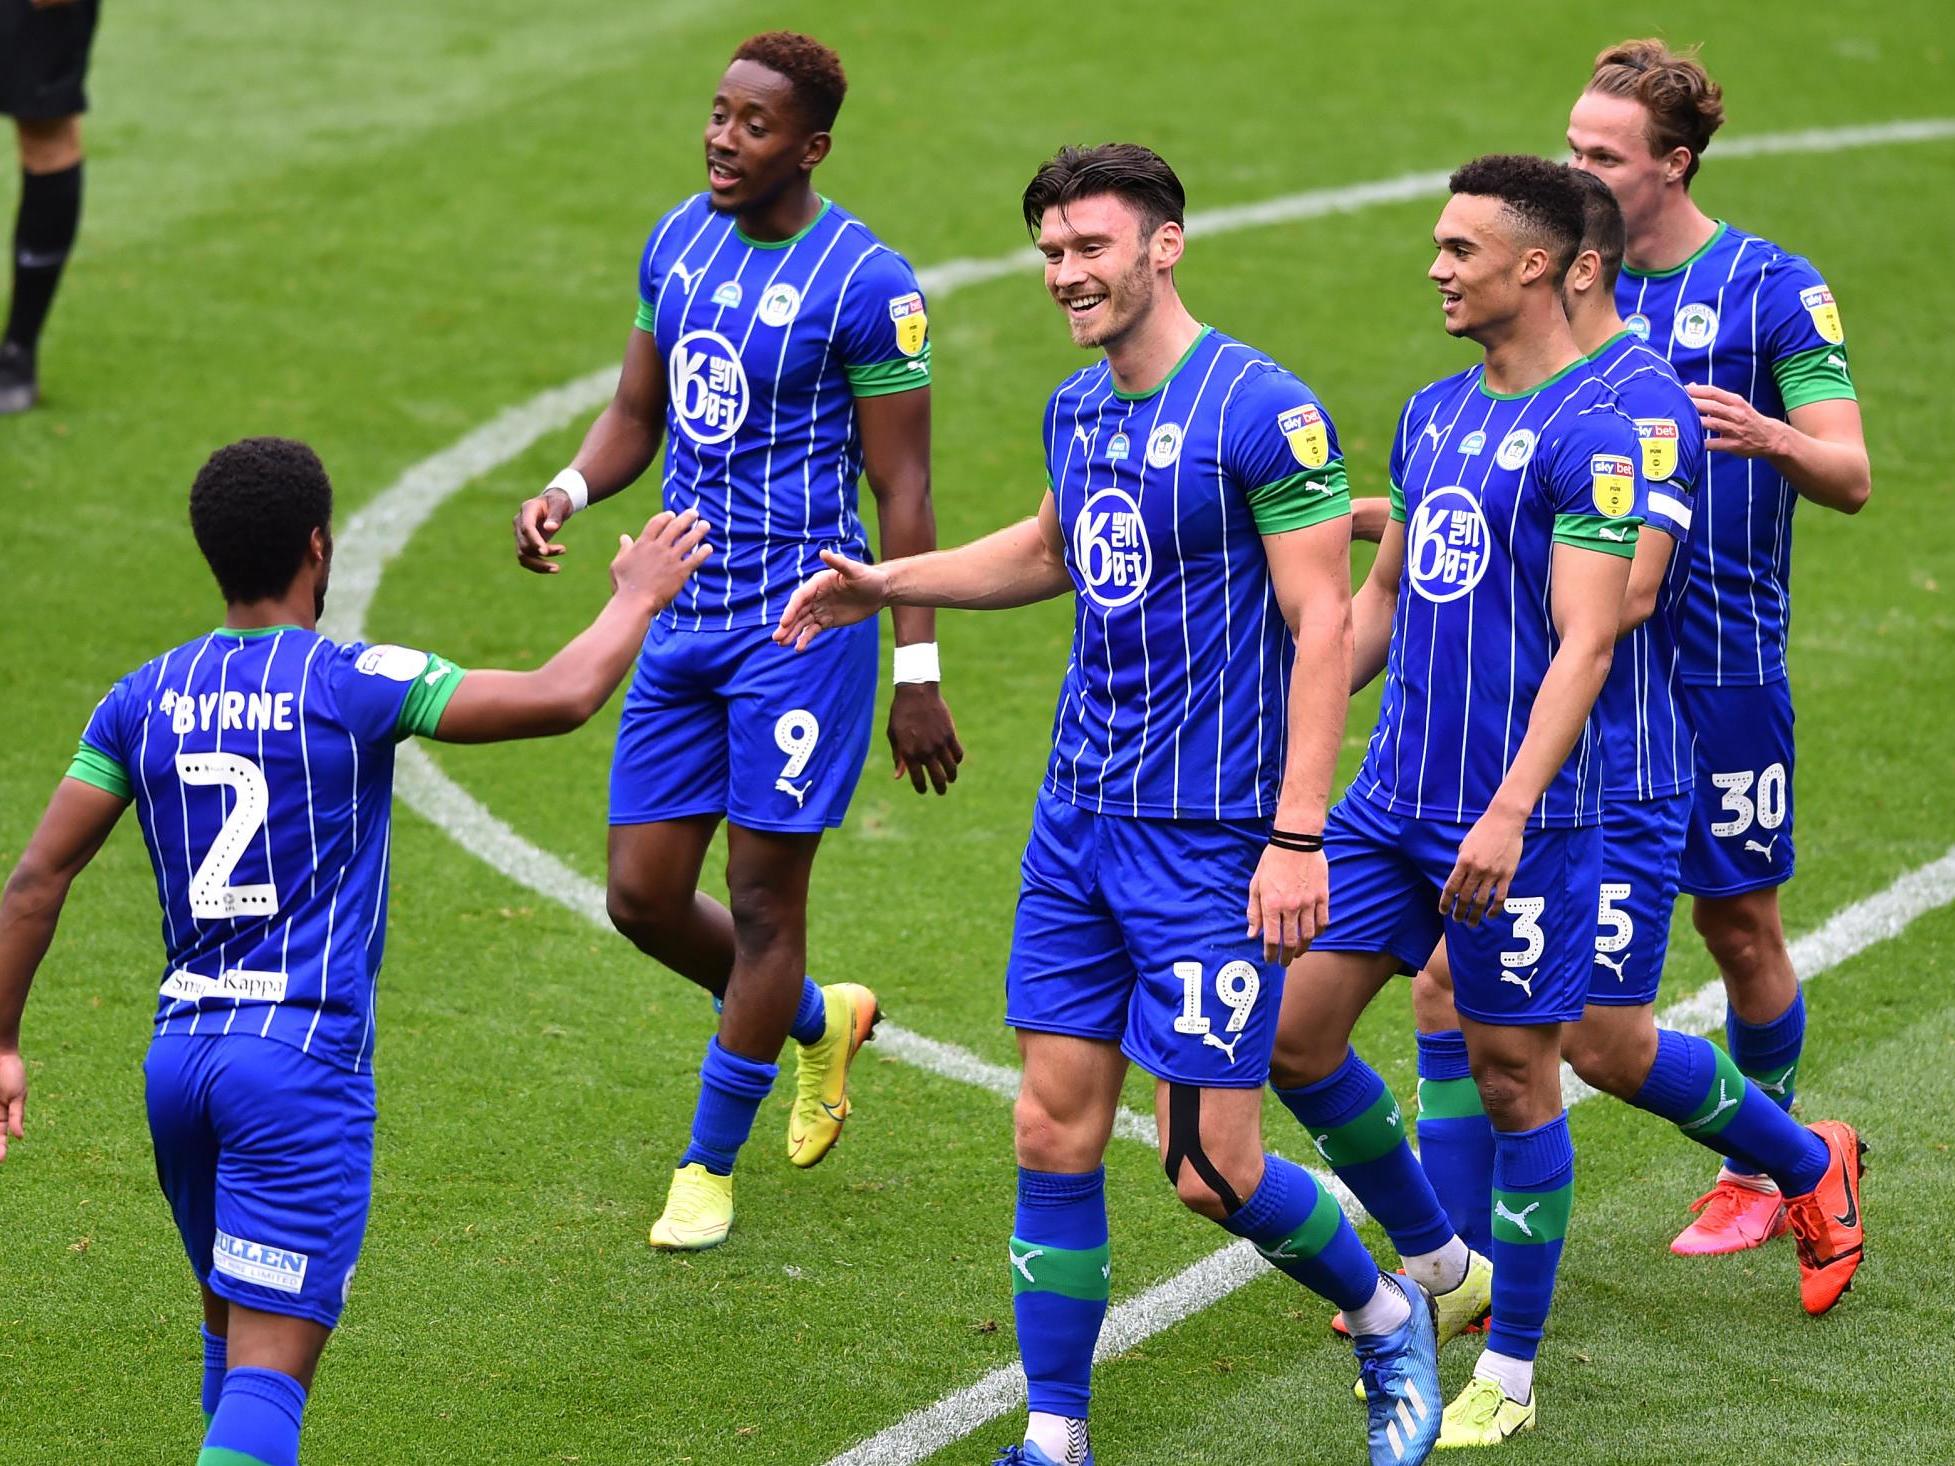 Wigan have been relegated after their points deduction